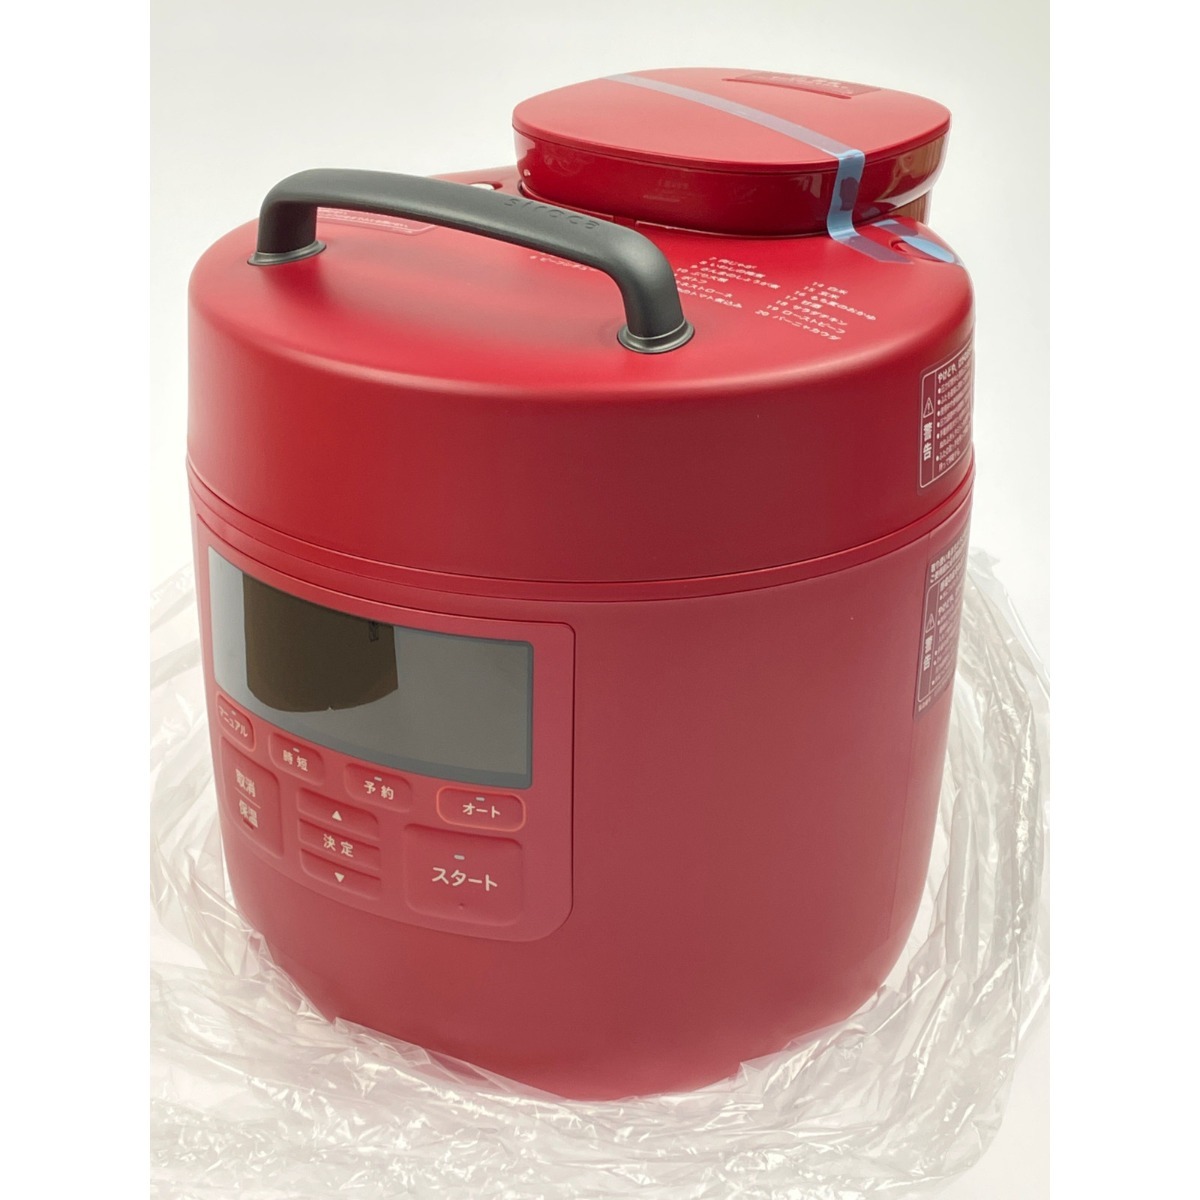 vv siroca white ka electric pressure cooker ...shefPRO red 2023 year made SP-2DS271 breaking the seal unused goods unused . close 